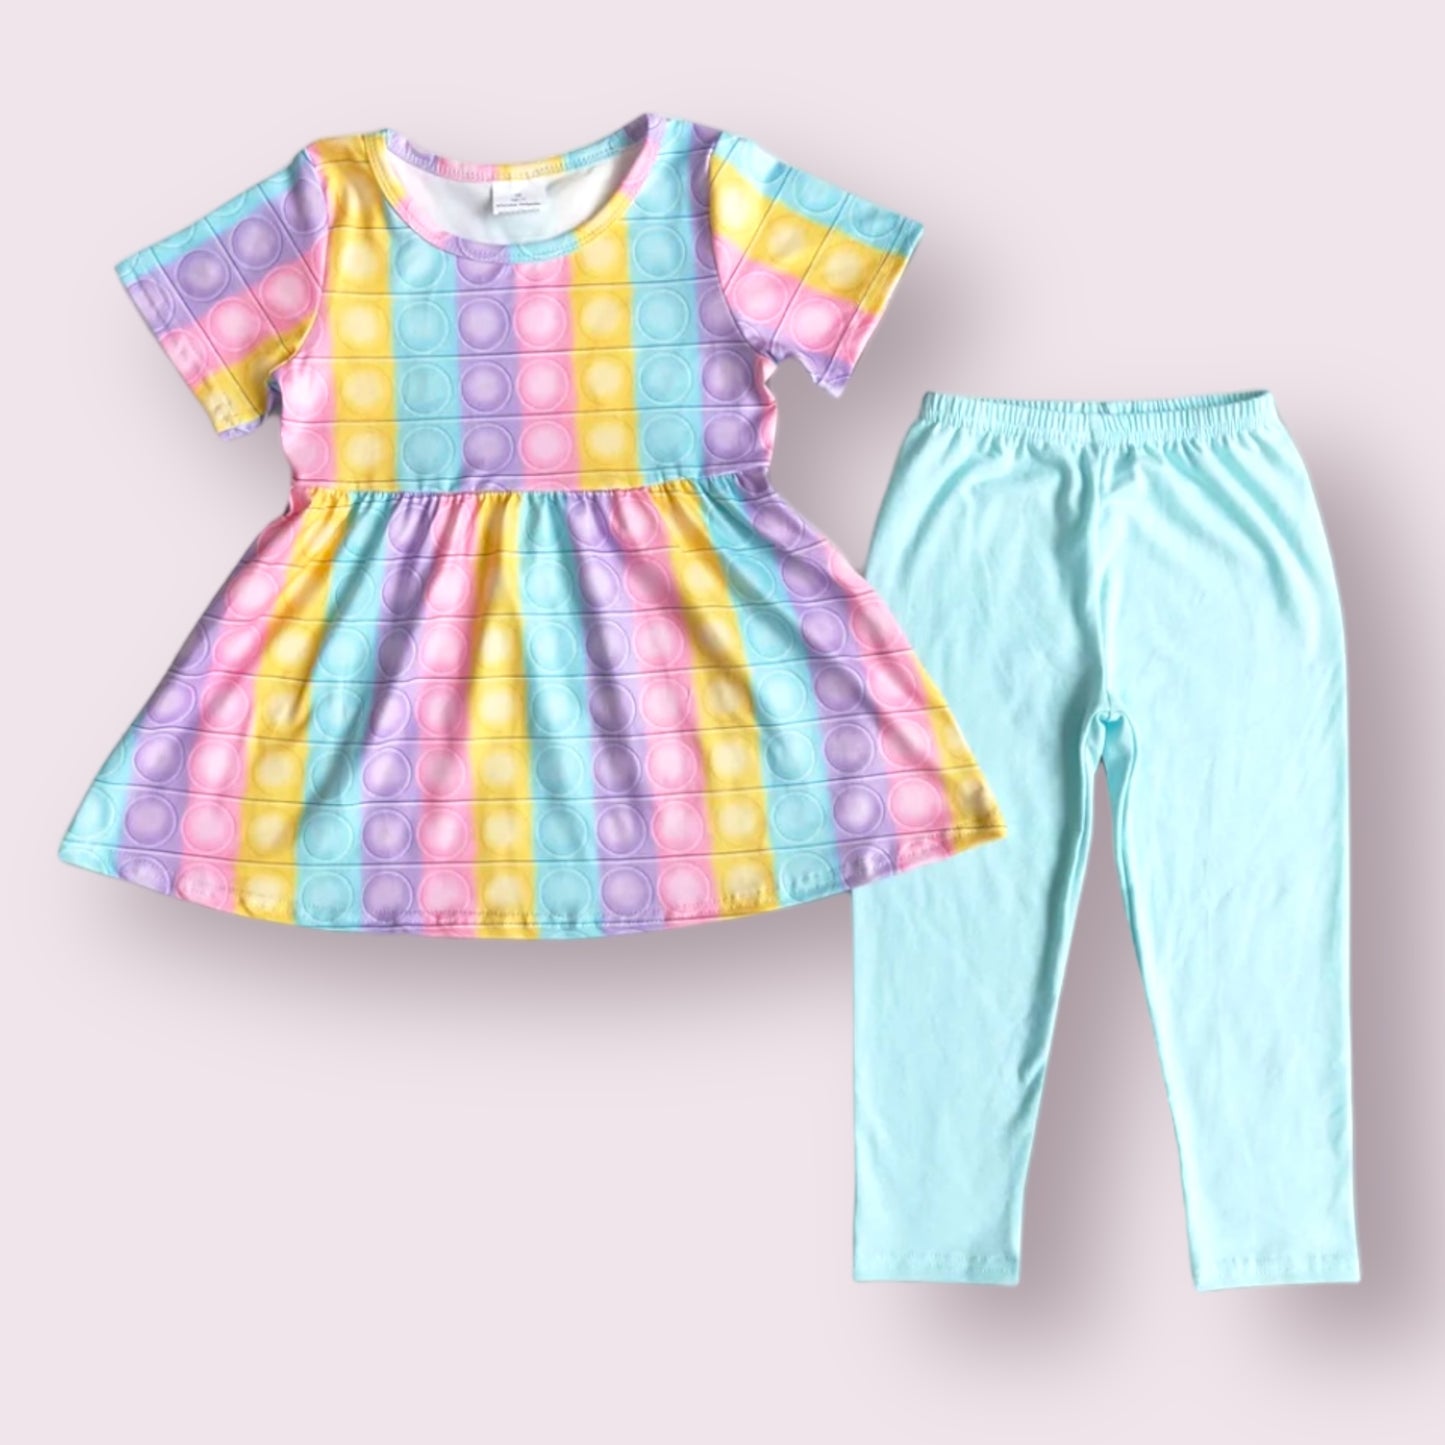 Girl’s Pop It Outfit